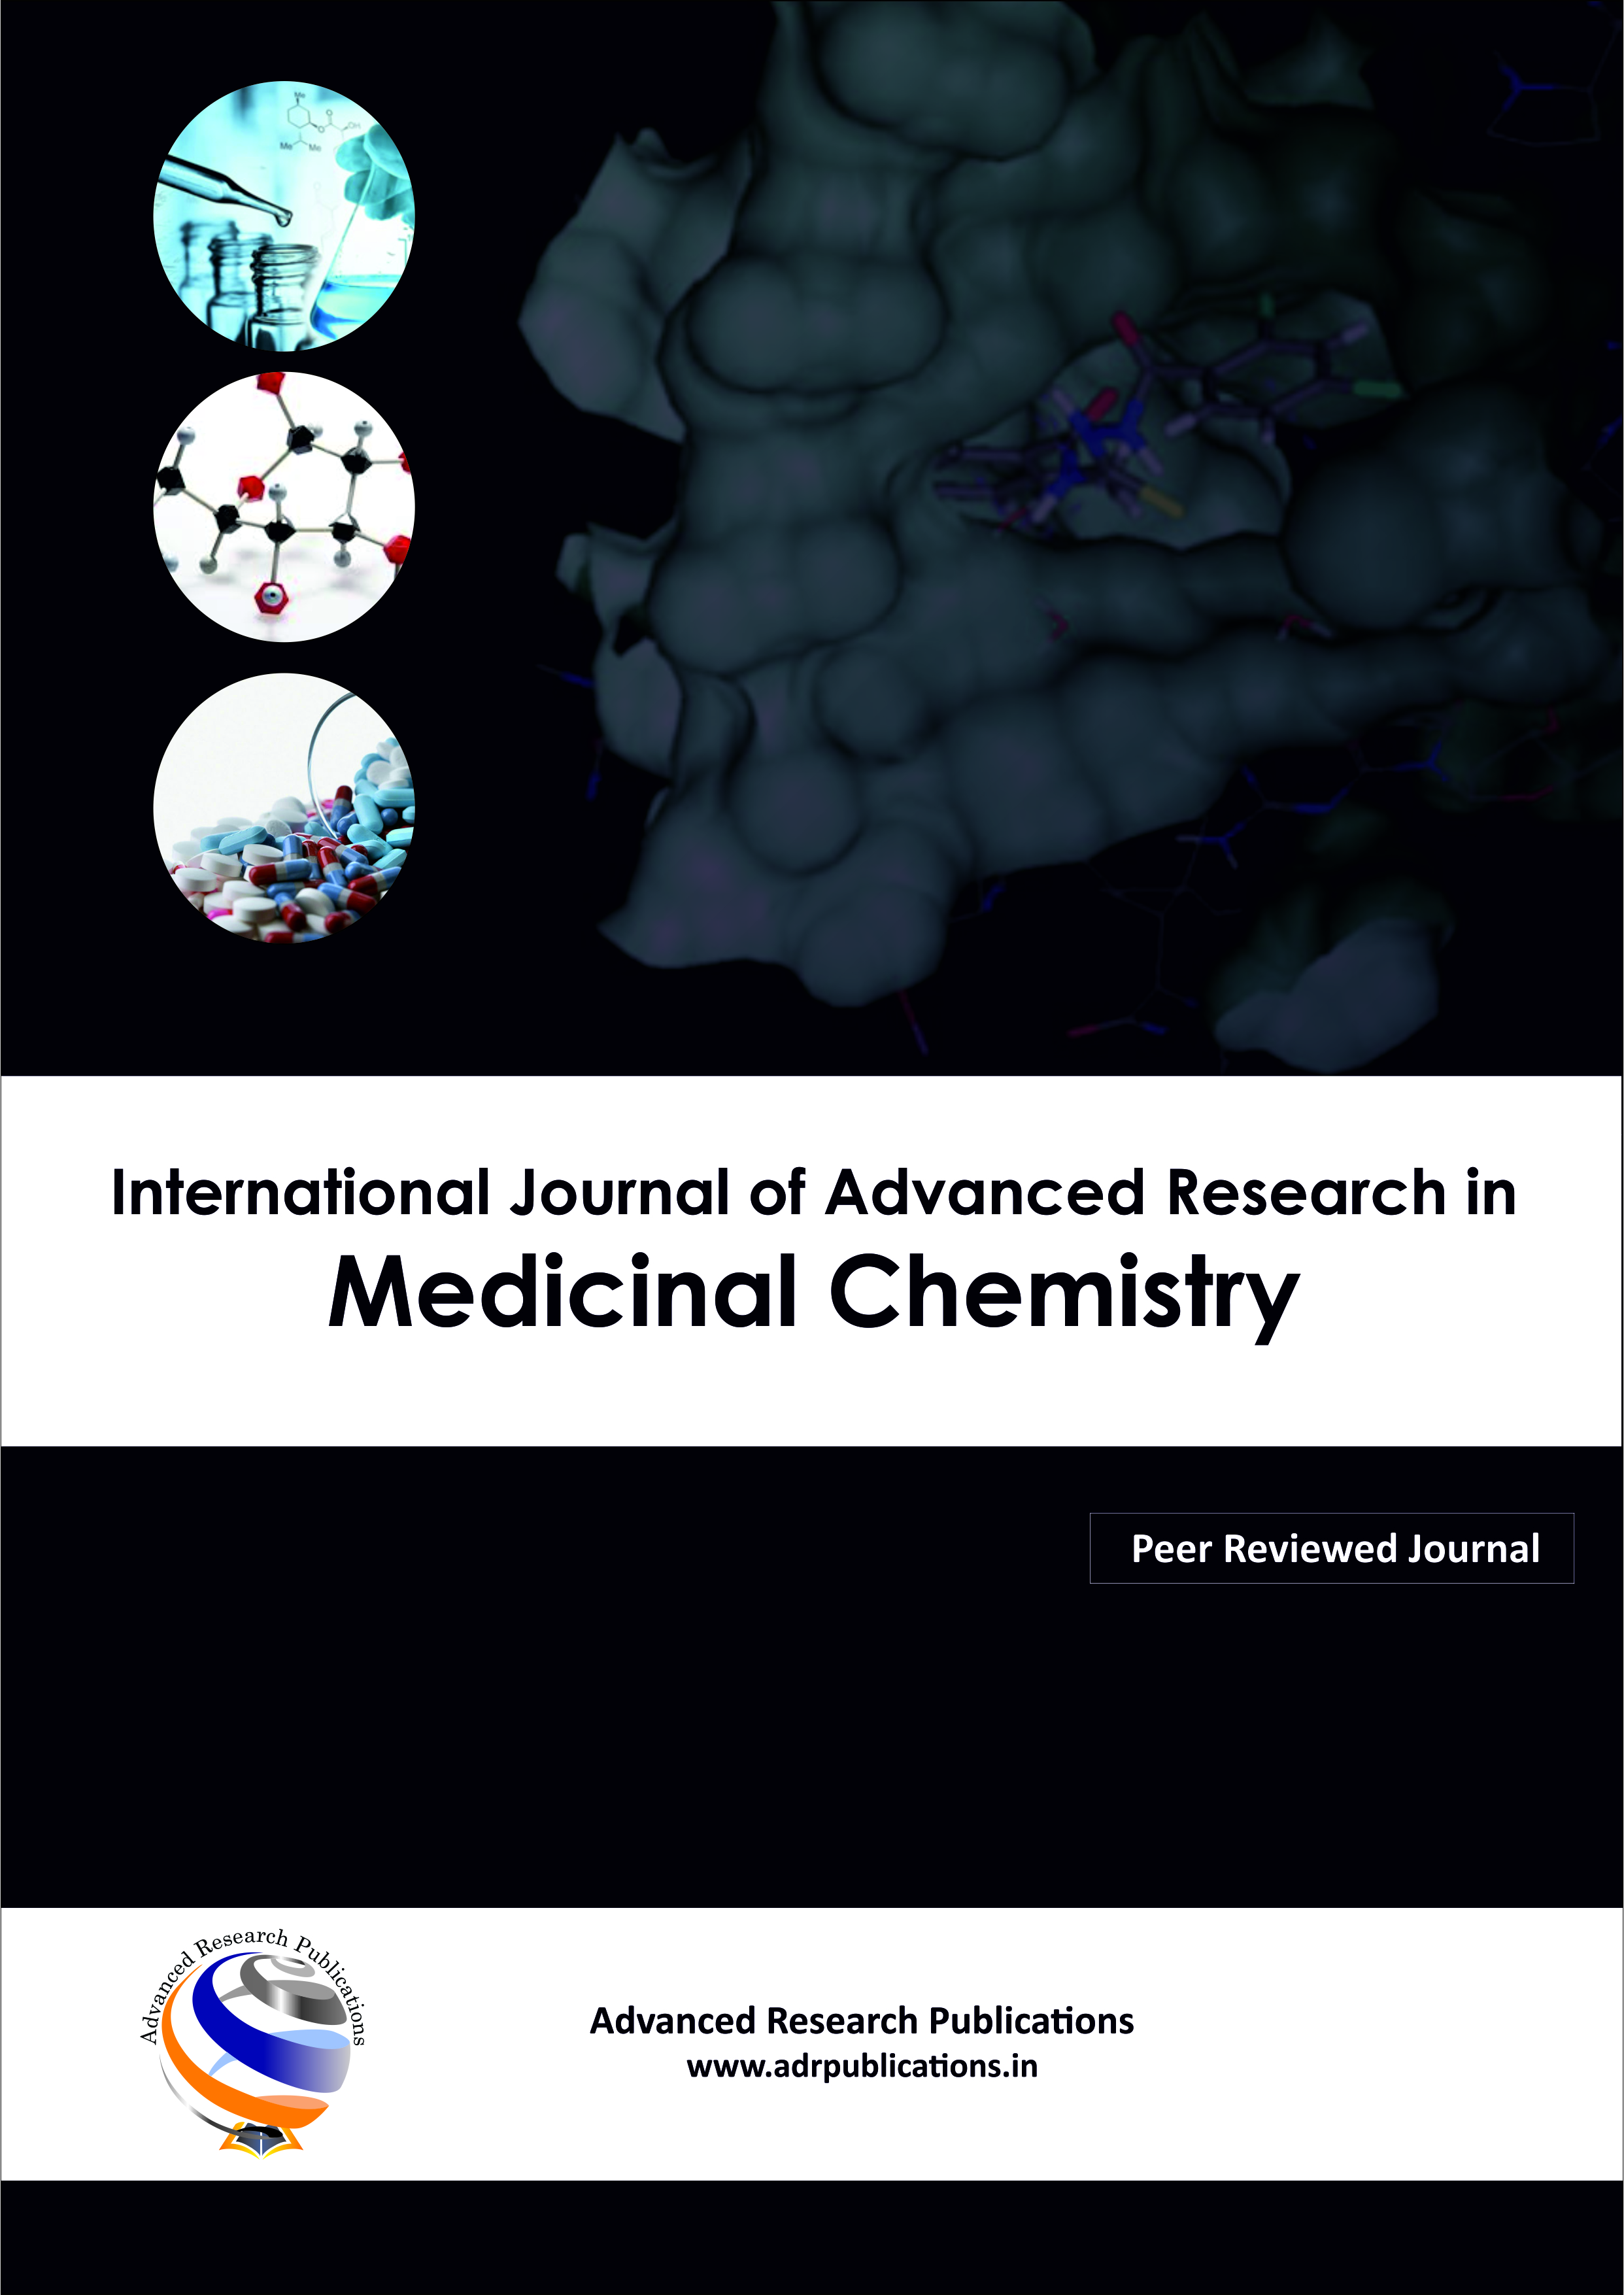 International Journal of Advanced Research in Medicinal Chemistry